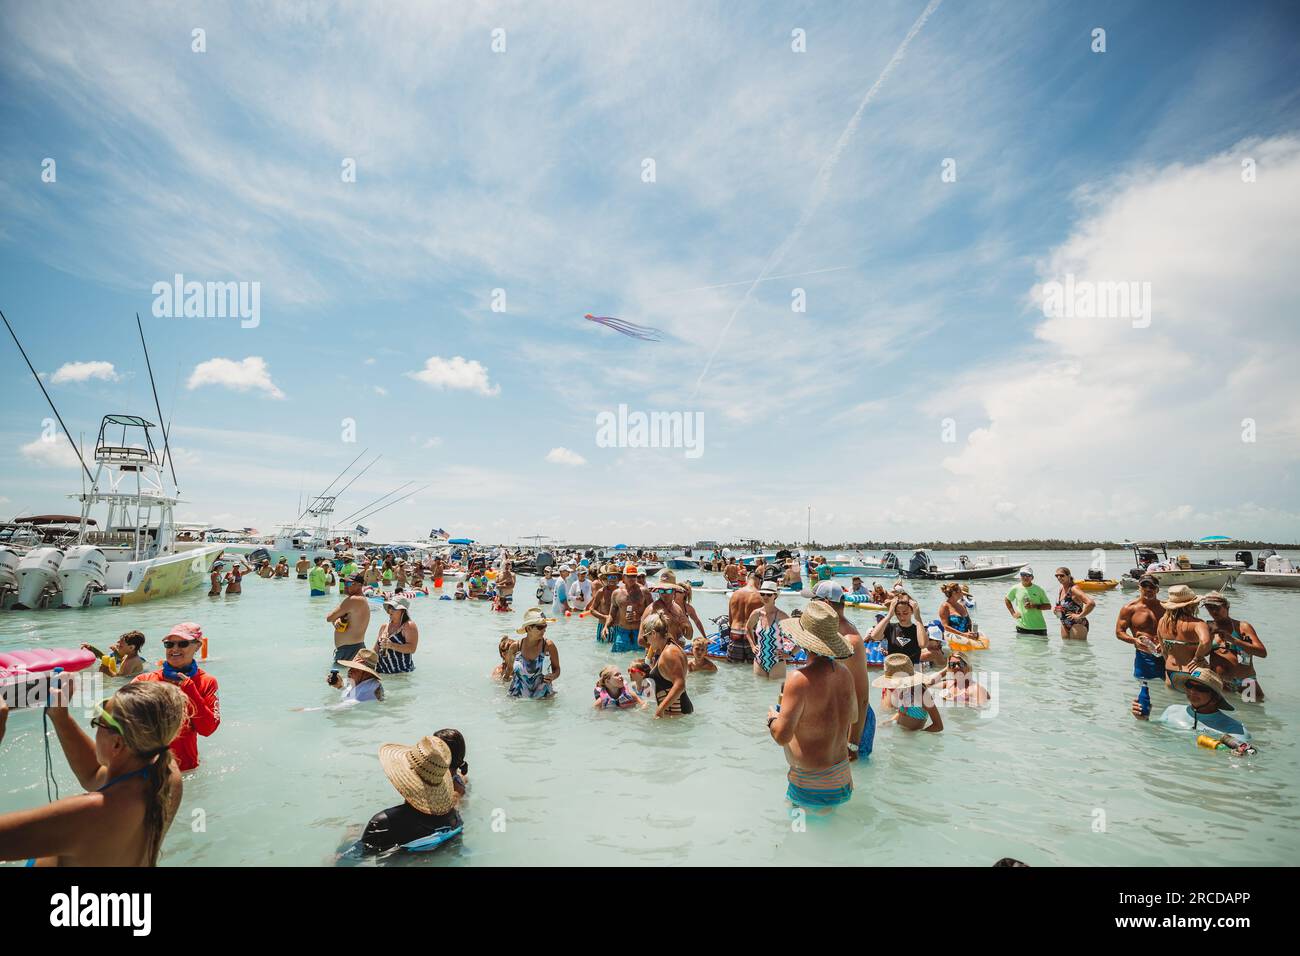 Crowd listens to live band play on the water in the Florida Keys Stock Photo